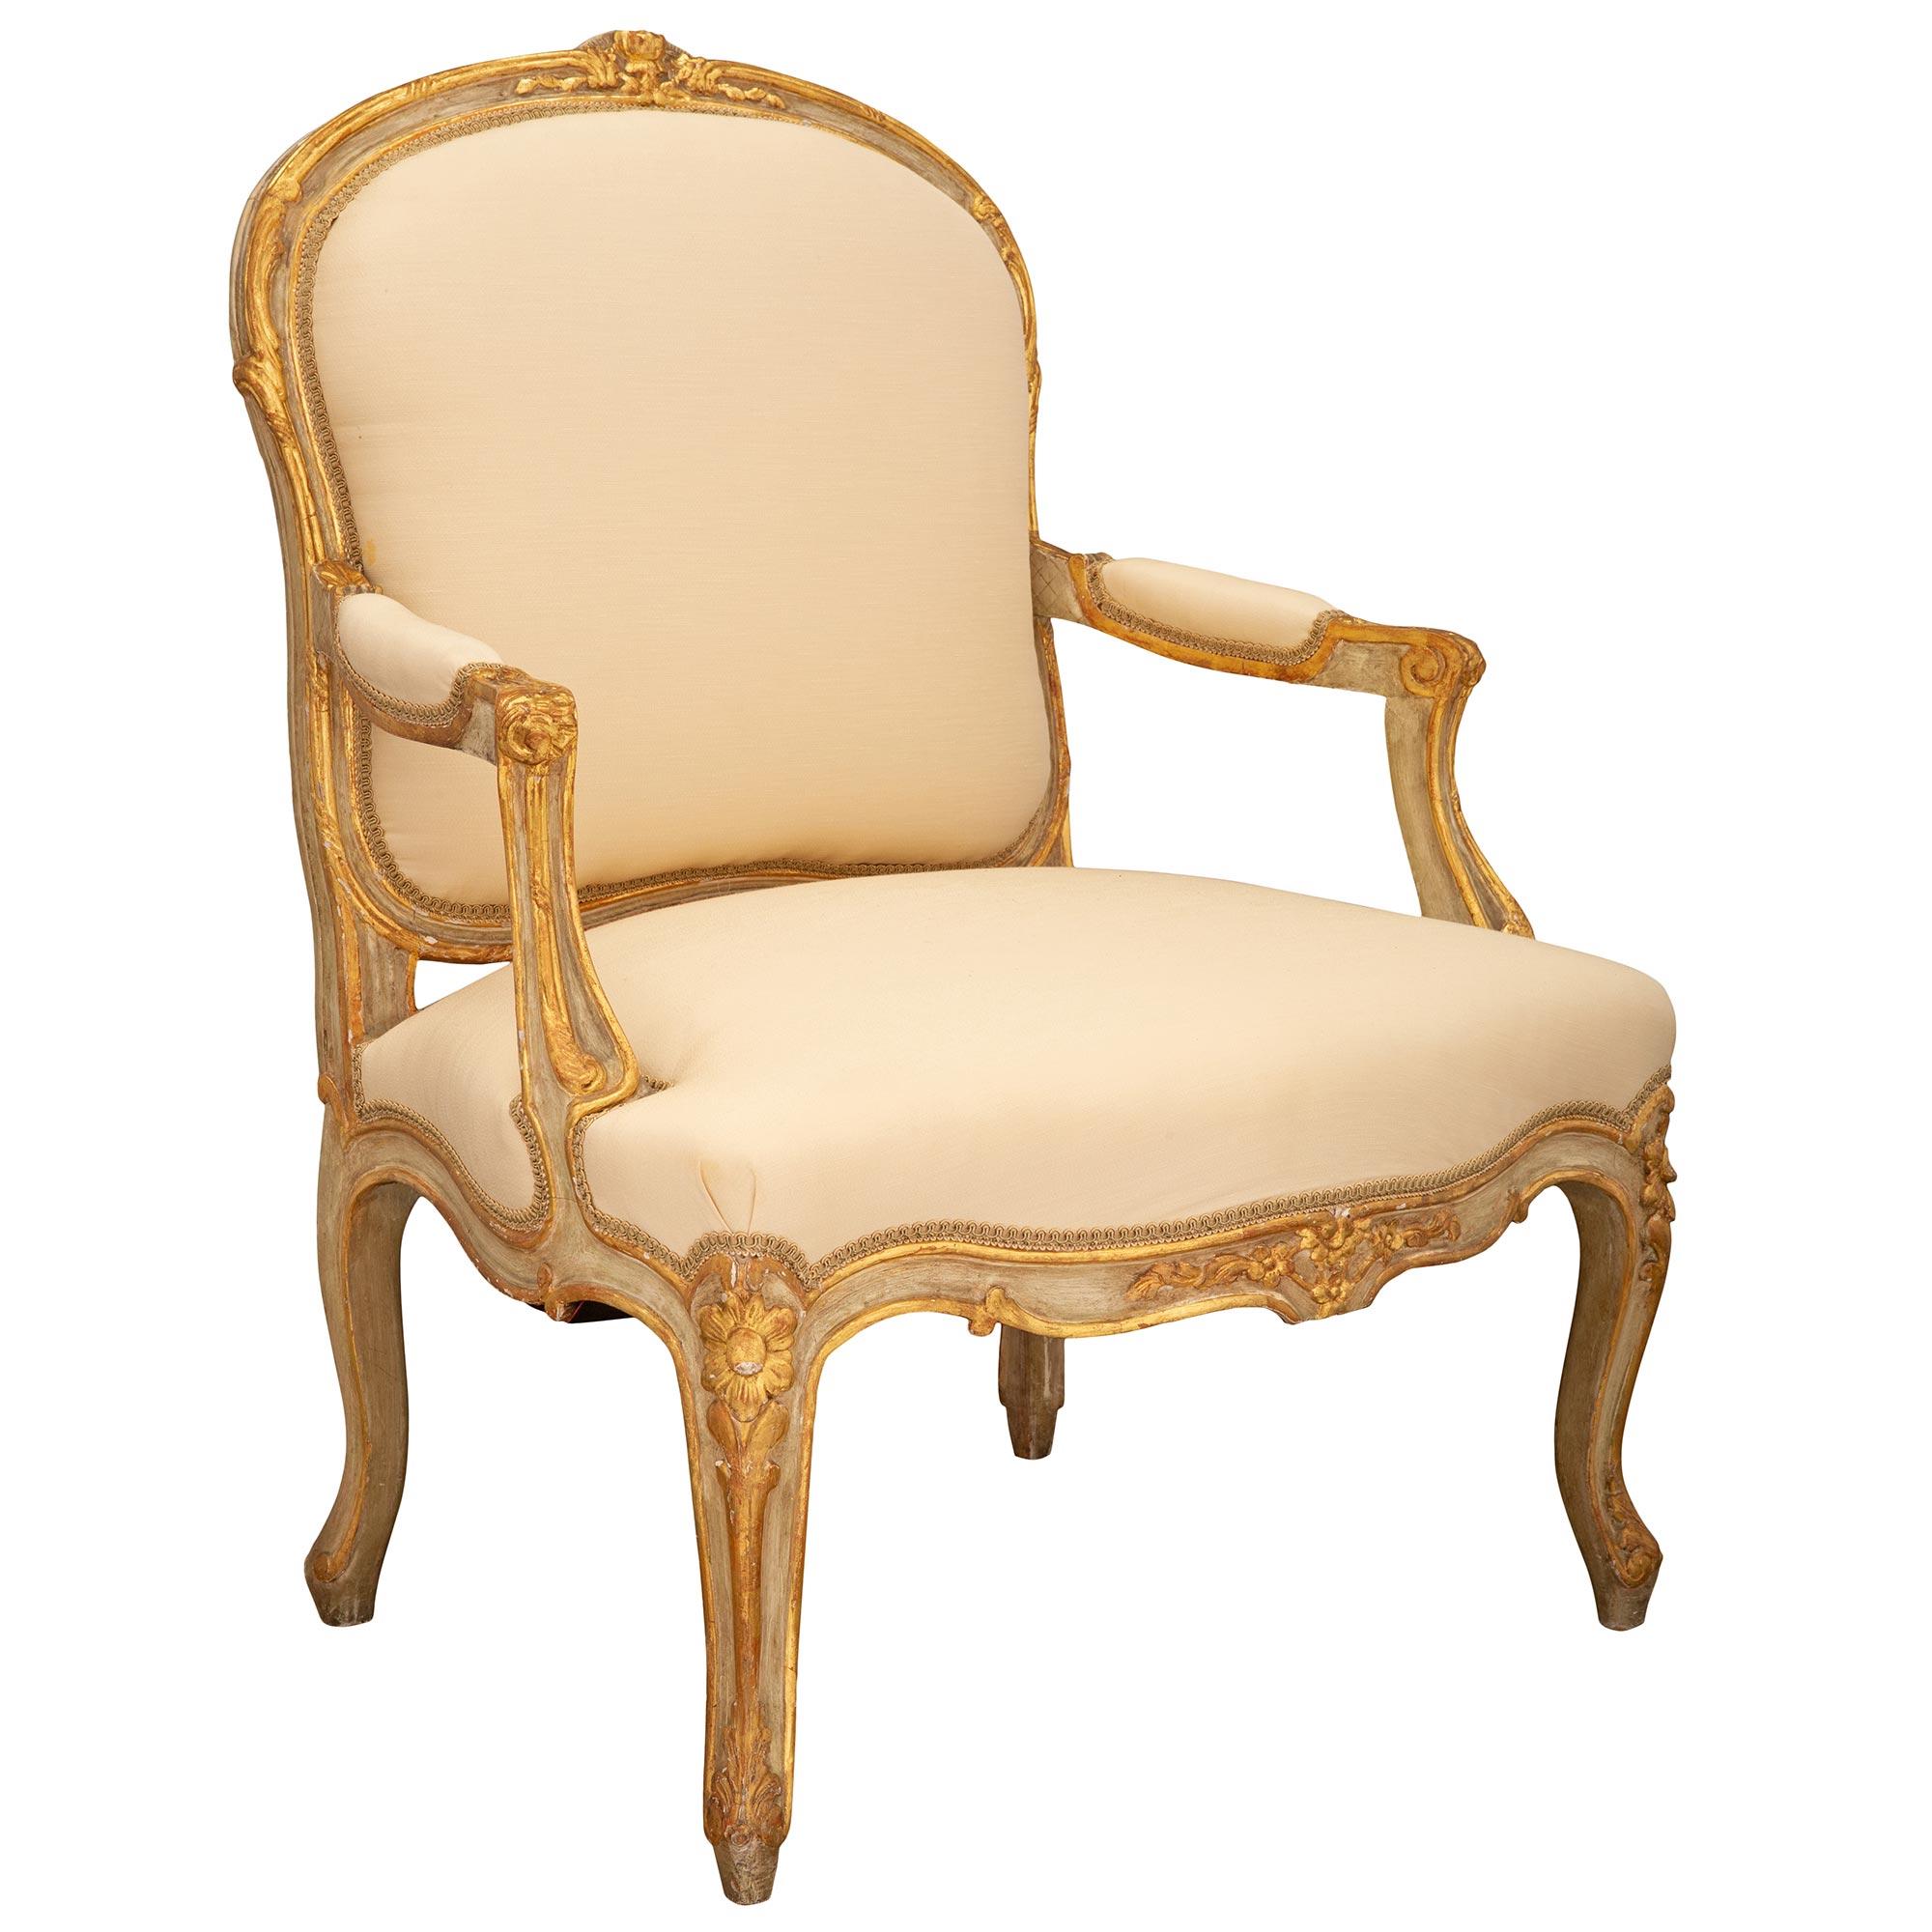 A most elegant pair of French 19th century Louis XV st. patinated and giltwood armchairs. Each armchair is raised by slender cabriole legs with beautiful scrolled giltwood acanthus leaves and charming richly carved corner rosettes set on patinated